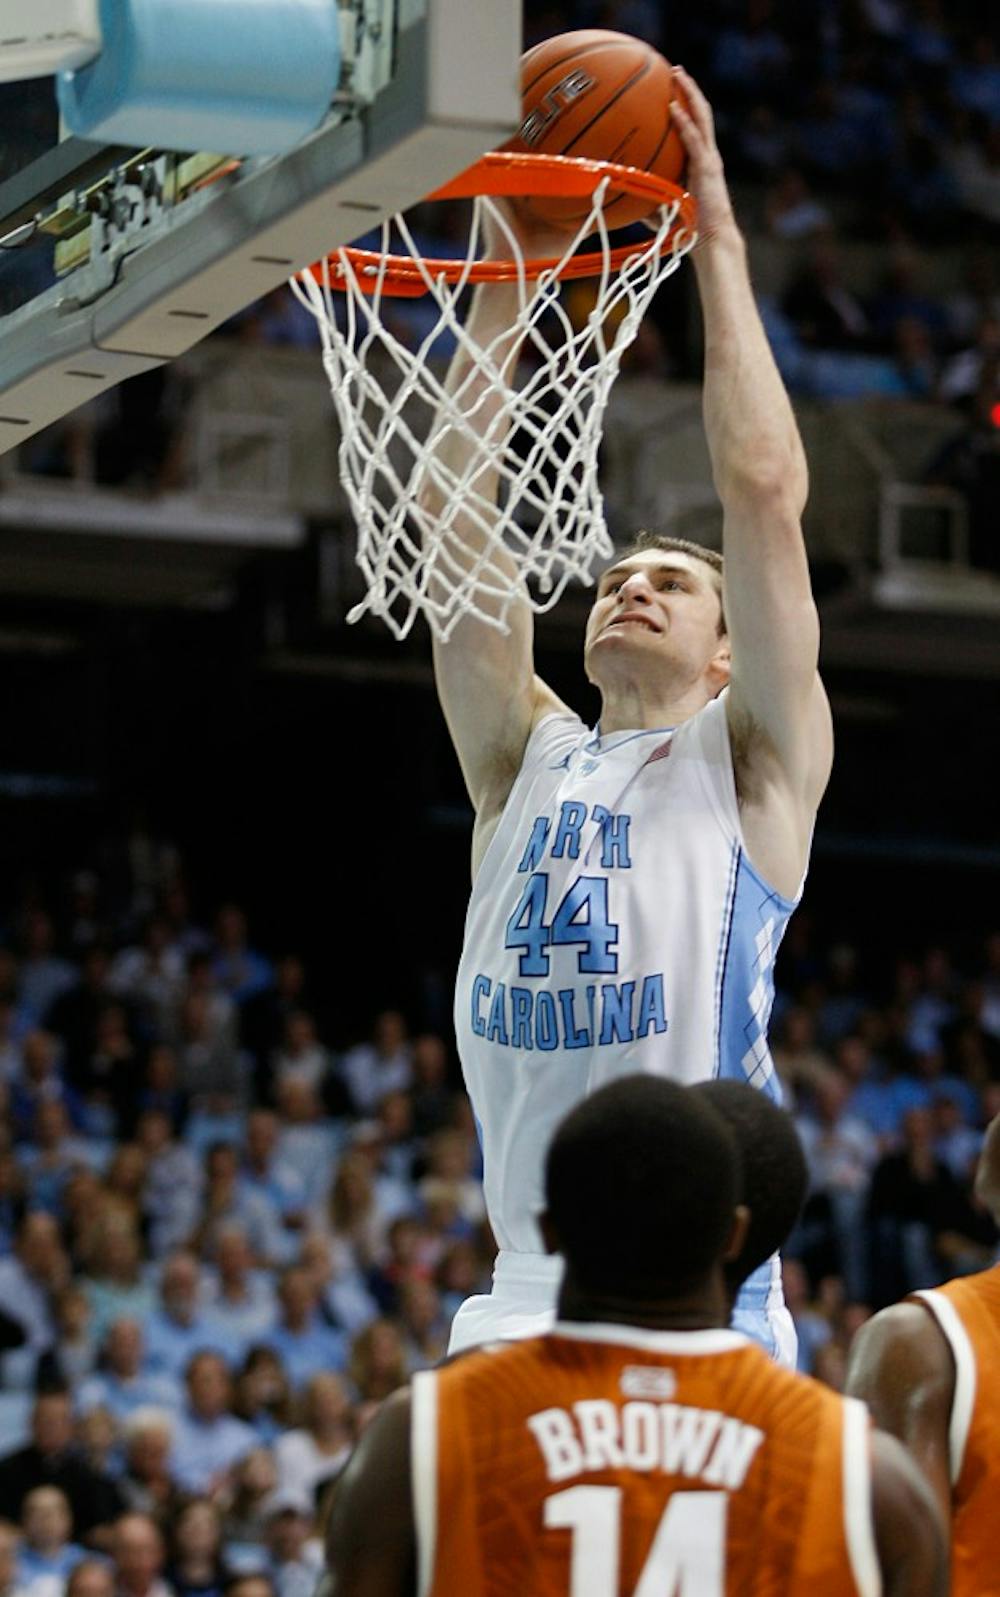 UNC forward Tyler Zeller dunks the ball during the game Wednesday at the Dean E. Smith Center. Zeller had 8 points and 2 blocks in the Tar Heels 82-63 win over Texas.